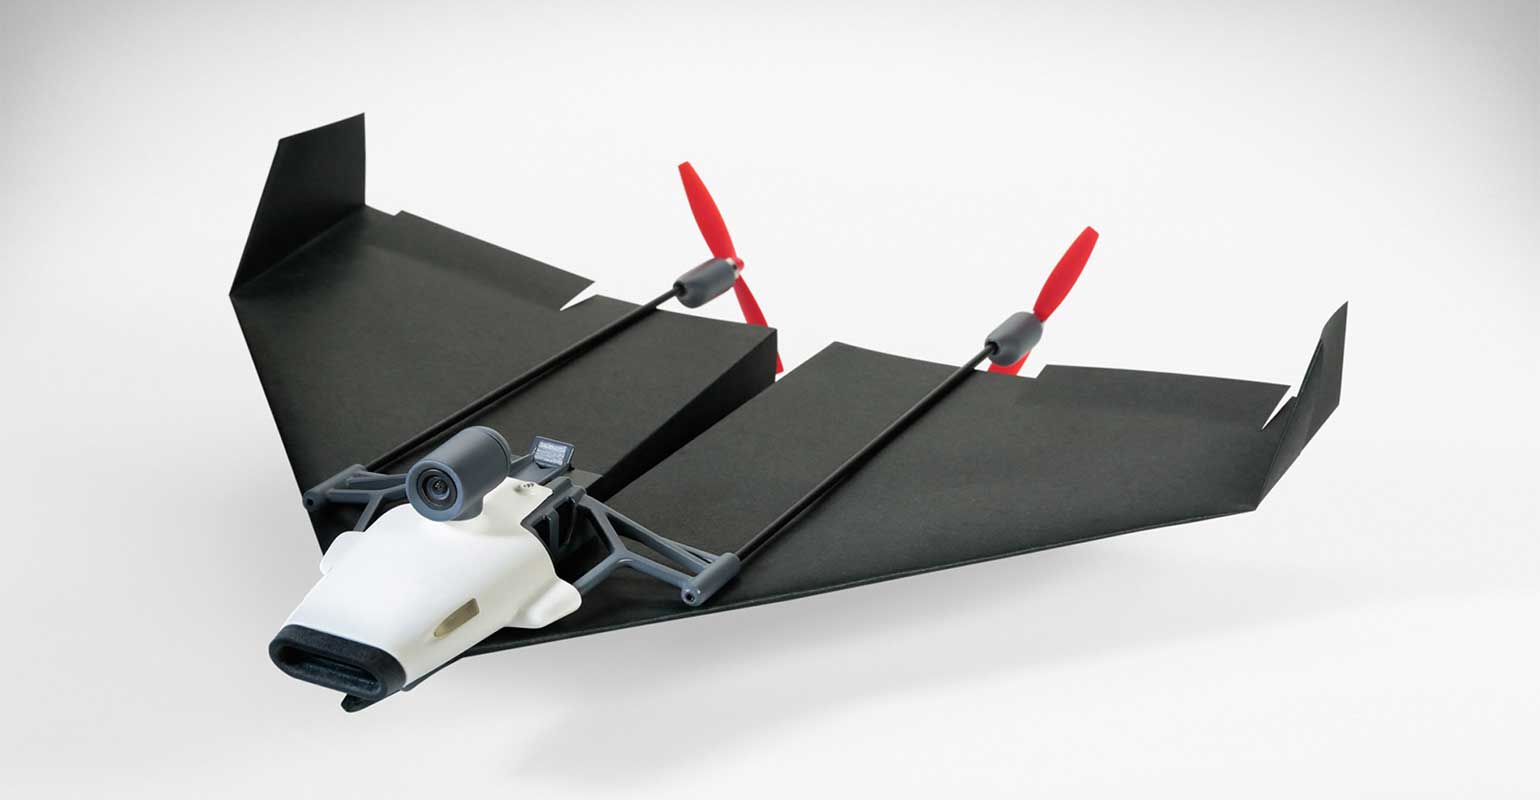 This Gadget Turns Paper Airplanes Into VR-Controlled Drones